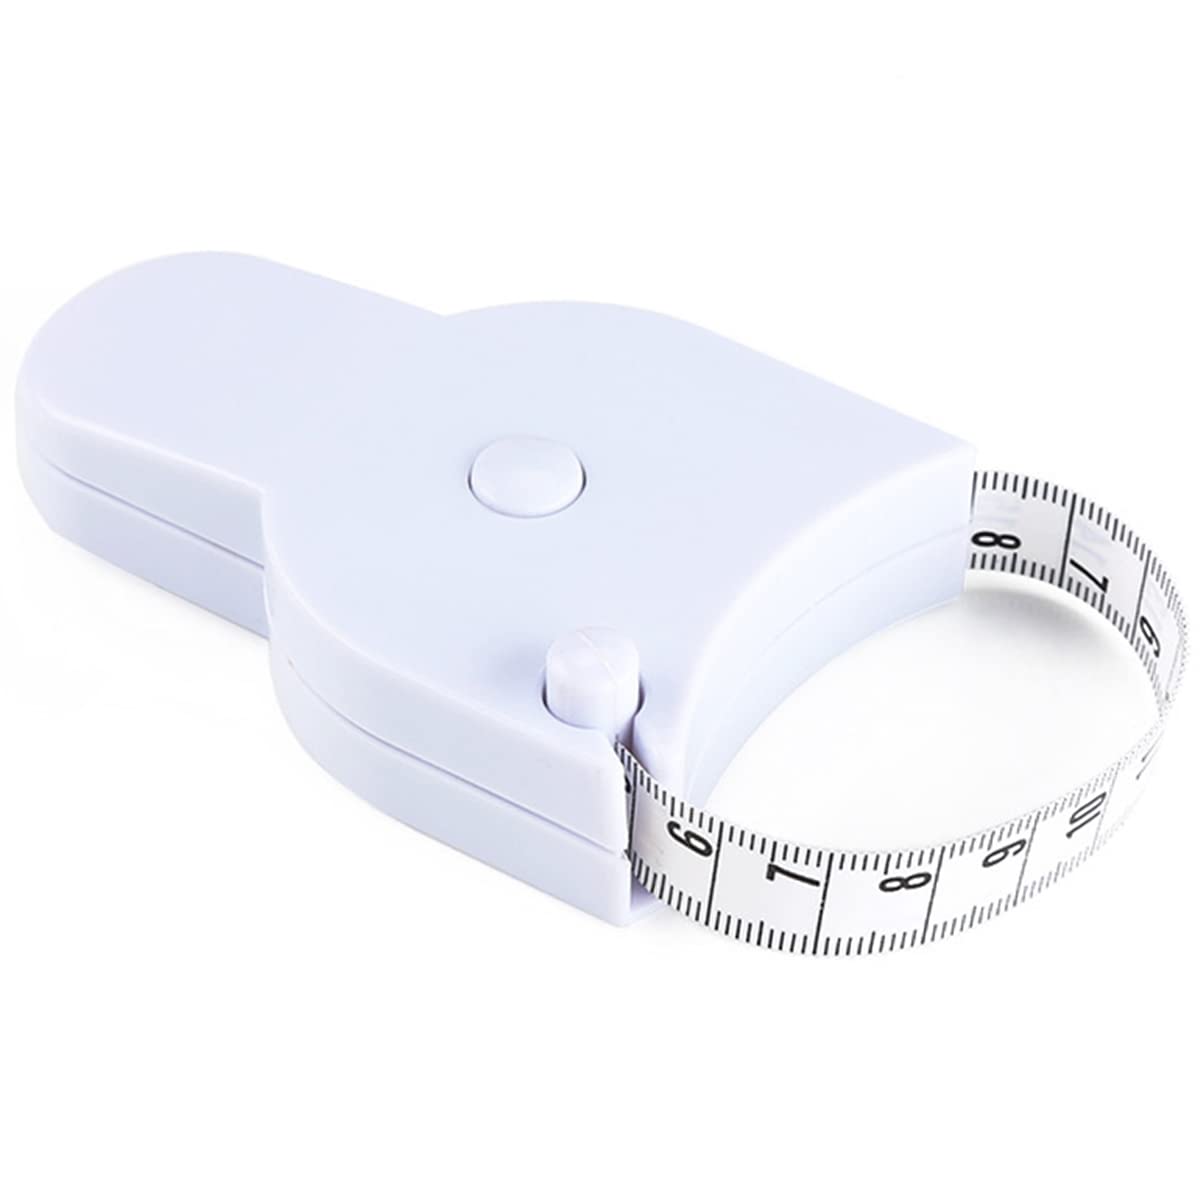 Body Tape Measure - Measure Your Muscles